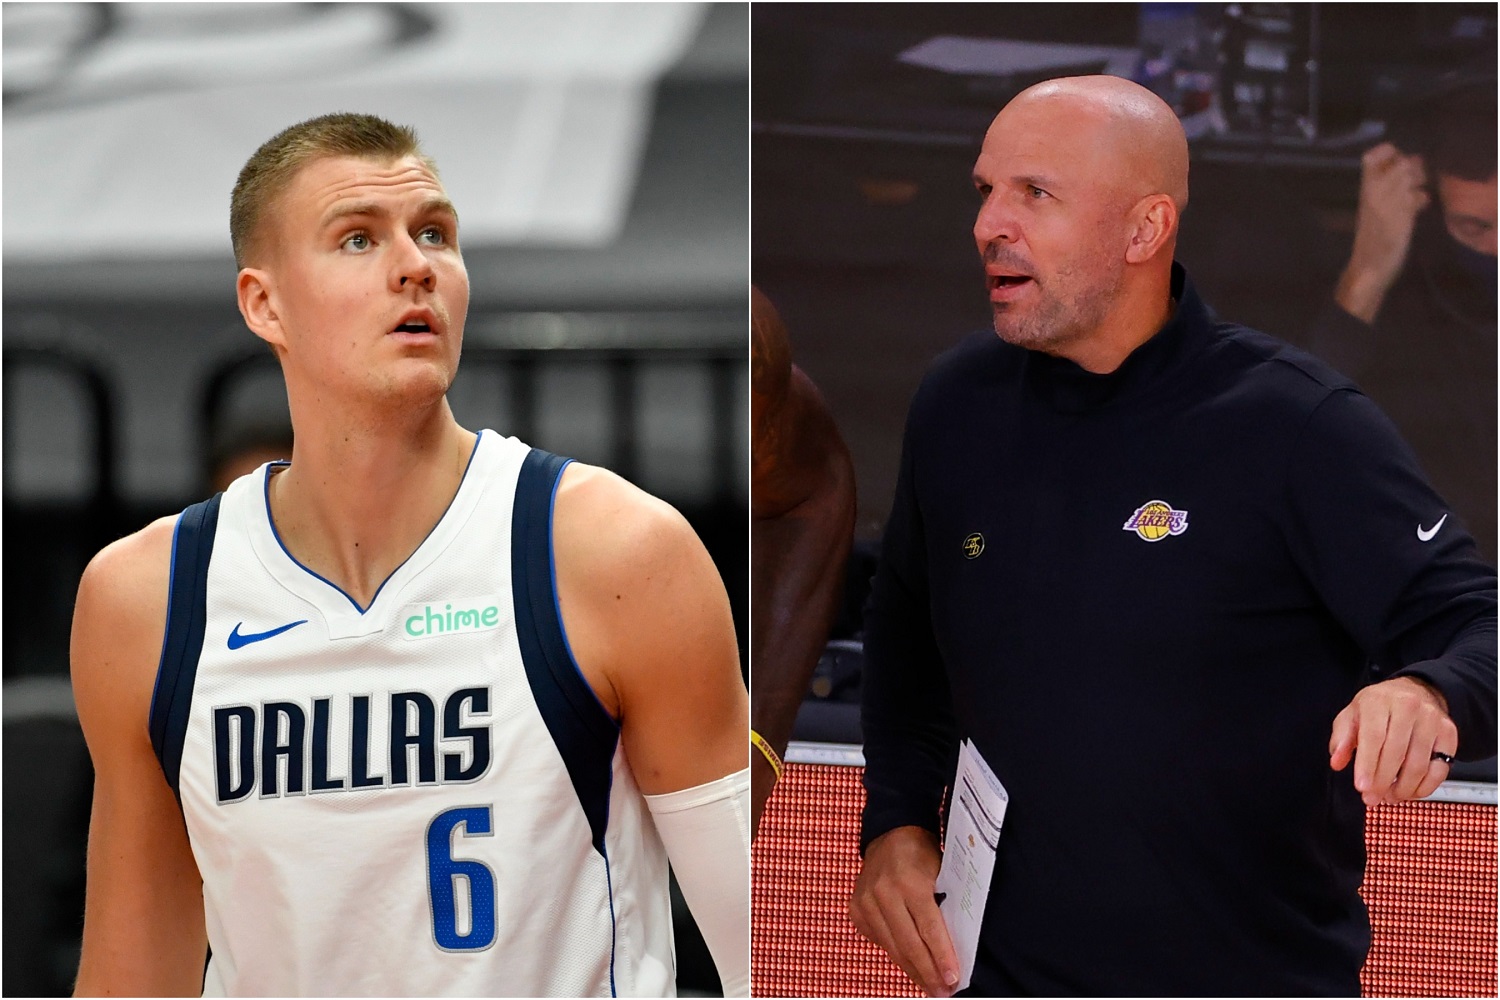 Kristaps Porzingis was not happy toward the end of the 2020-21 NBA season, but he will be playing for new head coach Jason Kidd this fall.